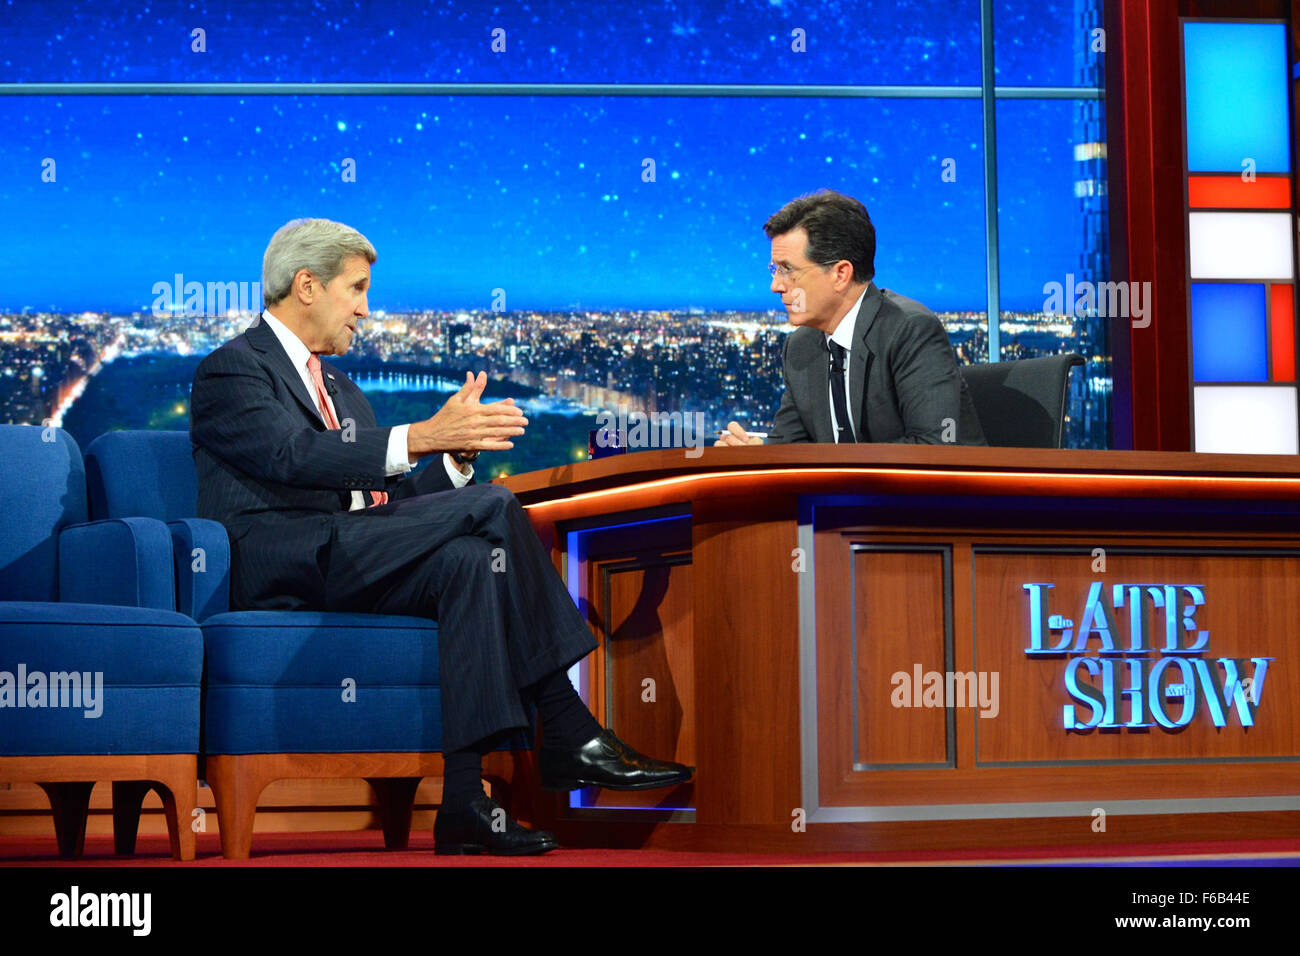 Secretary Kerry Makes an Appearance on The Late Show With Stephen Colbert in New York City Stock Photo